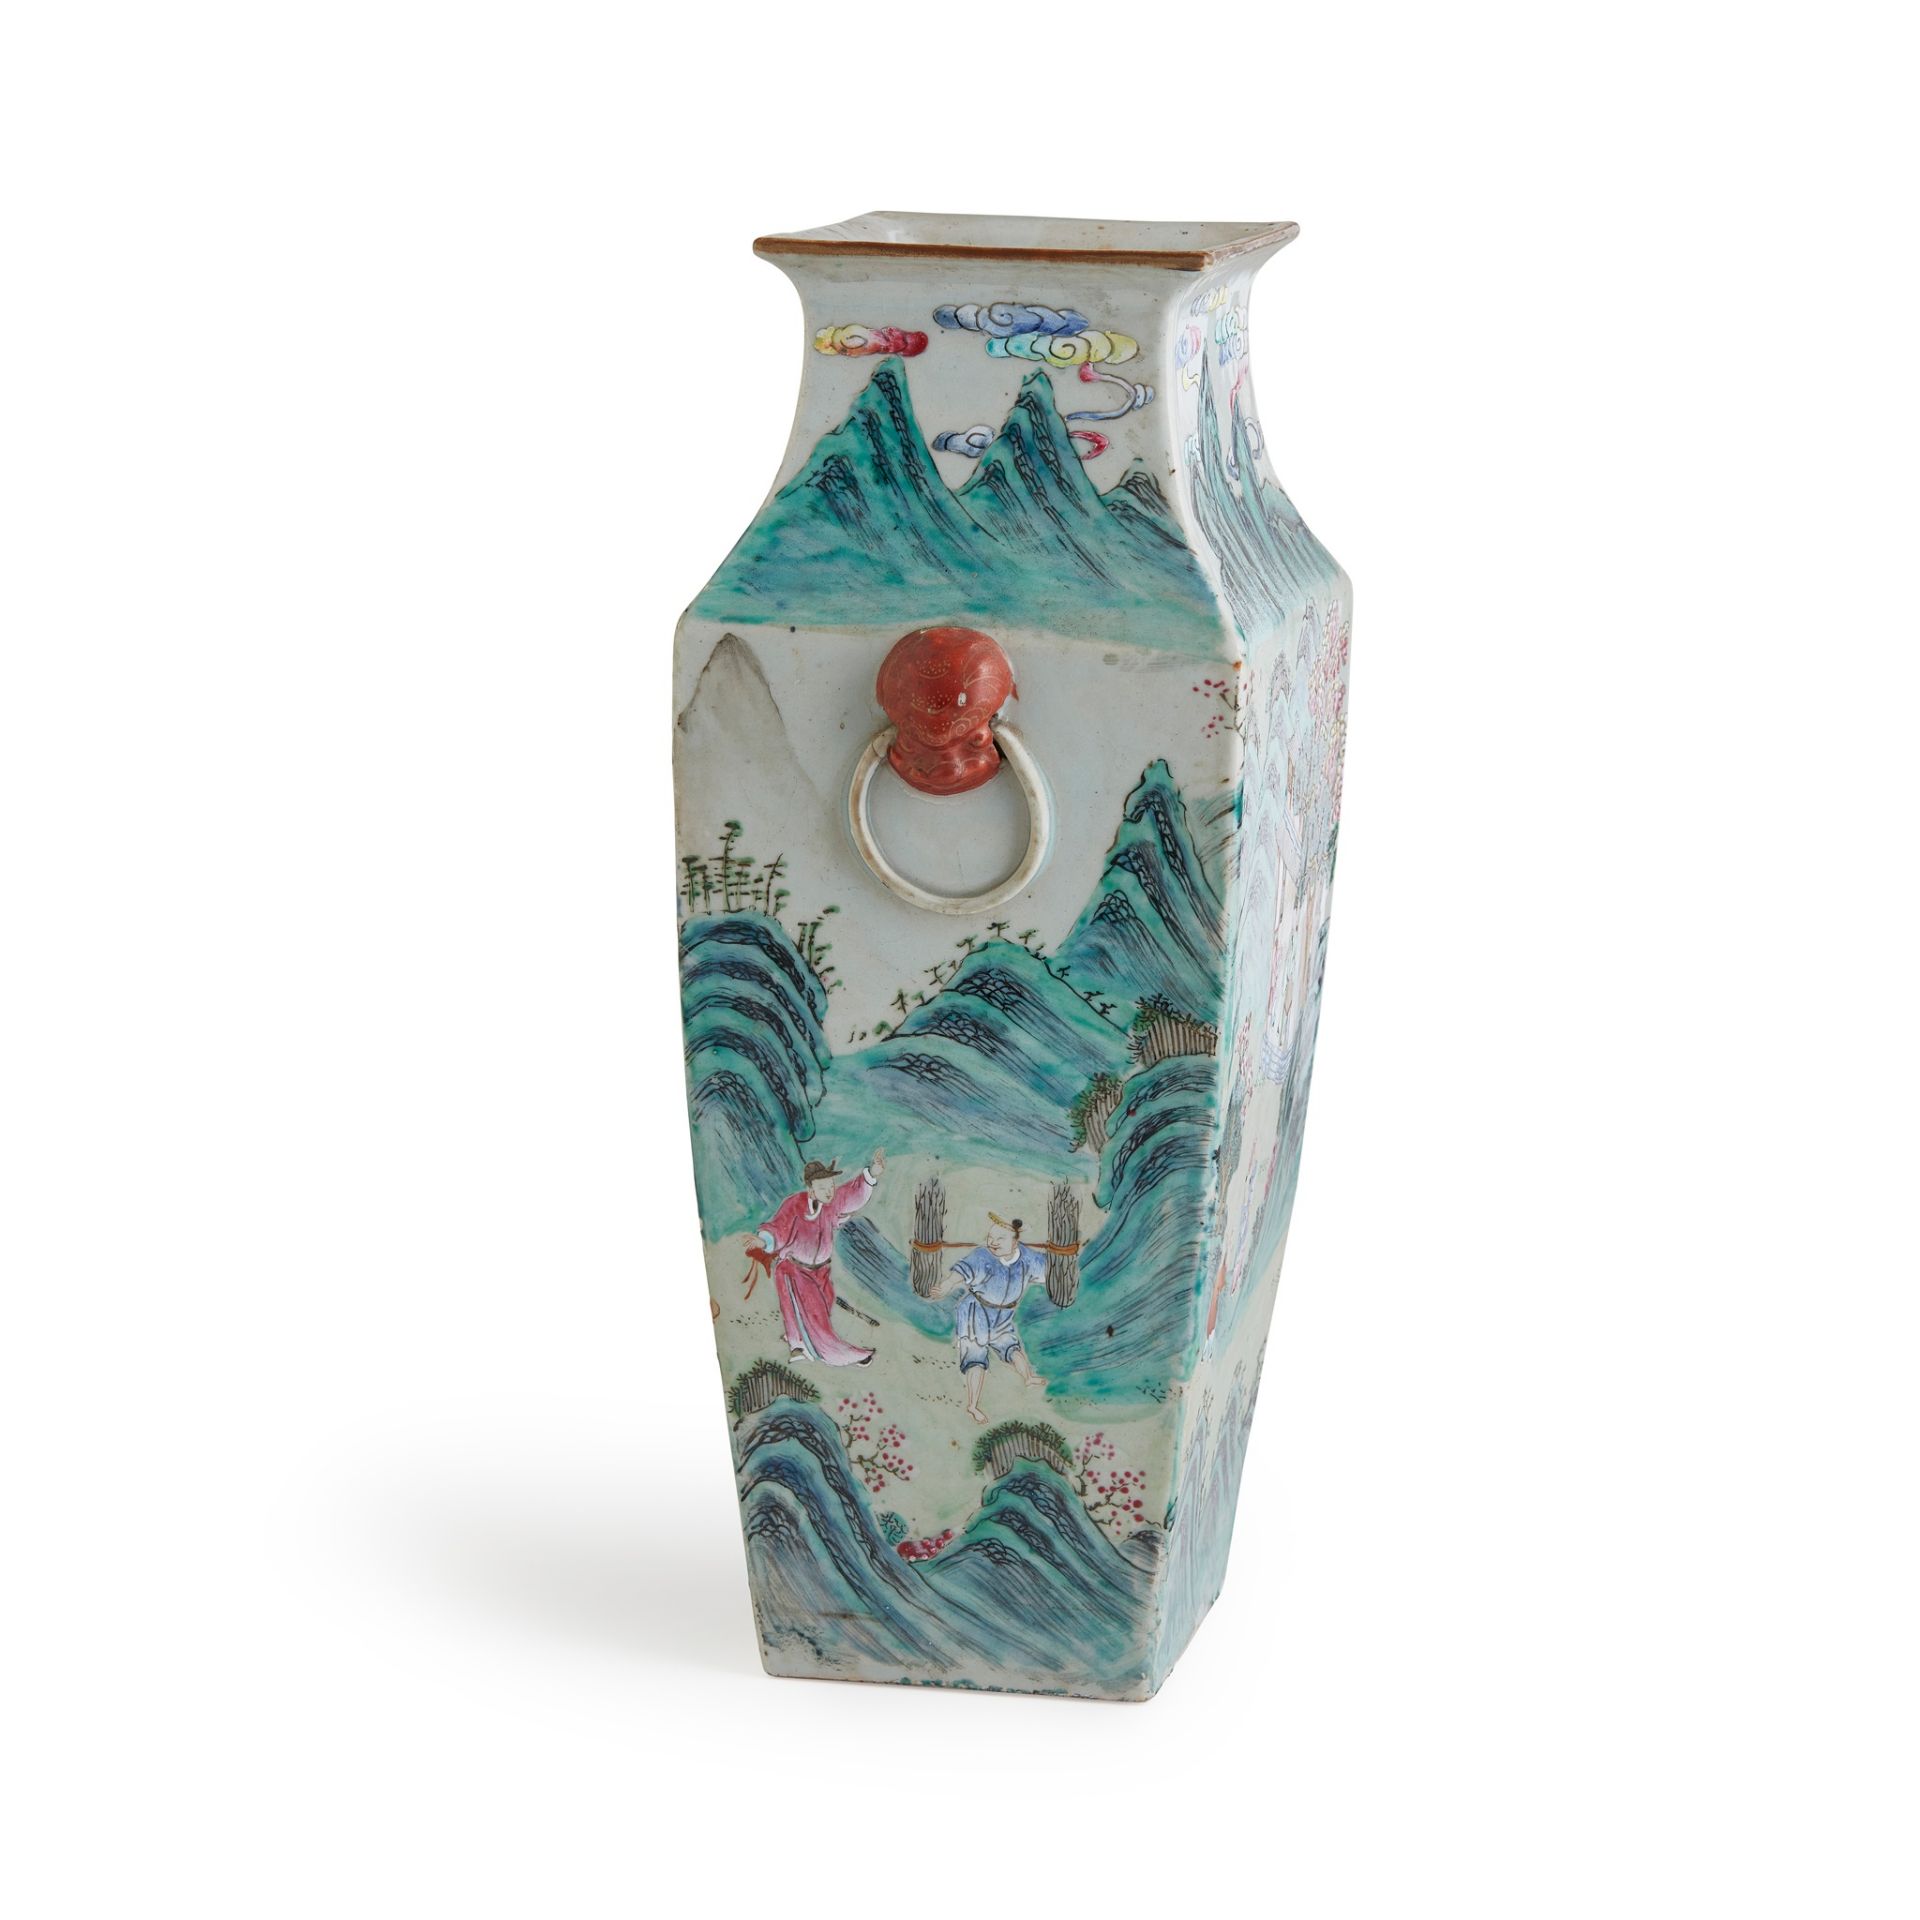 CHINESE FAMILLE ROSE FOUR-SECTIONED VASE QING DYNASTY, 19TH CENTURY - Image 2 of 2